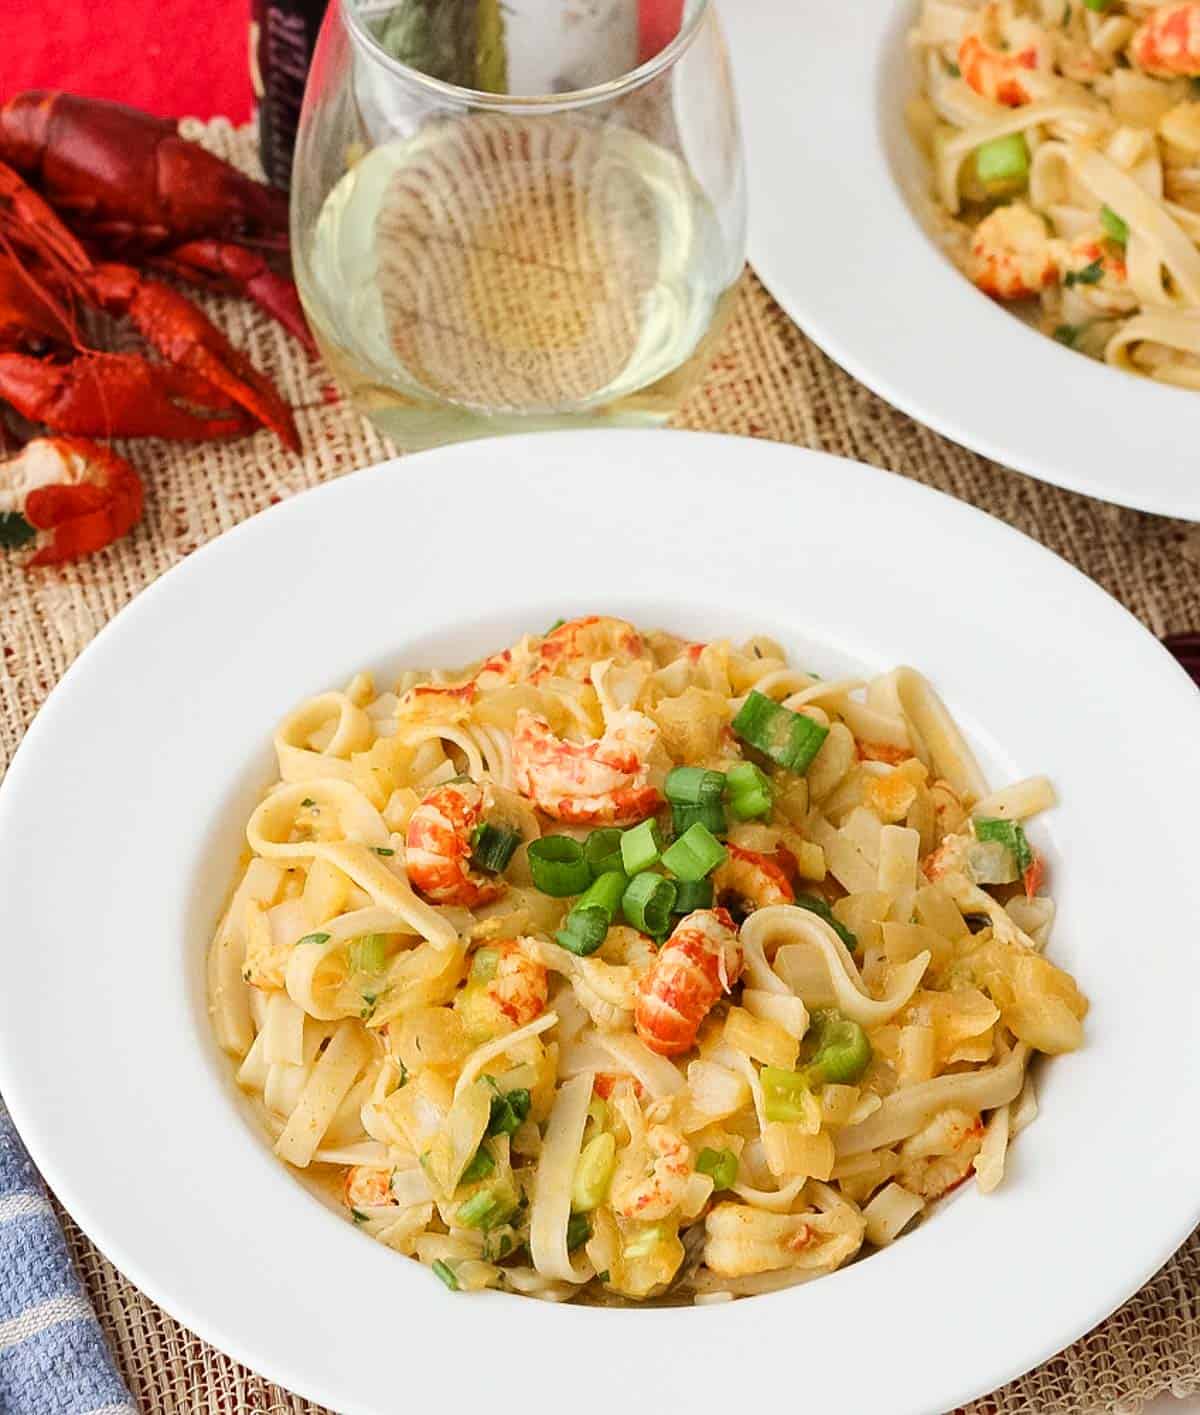 fettuccine topped with Crawfish Monica sauce and green onions in a white bowl next to a glass of white wine and freshly boiled crawfish.